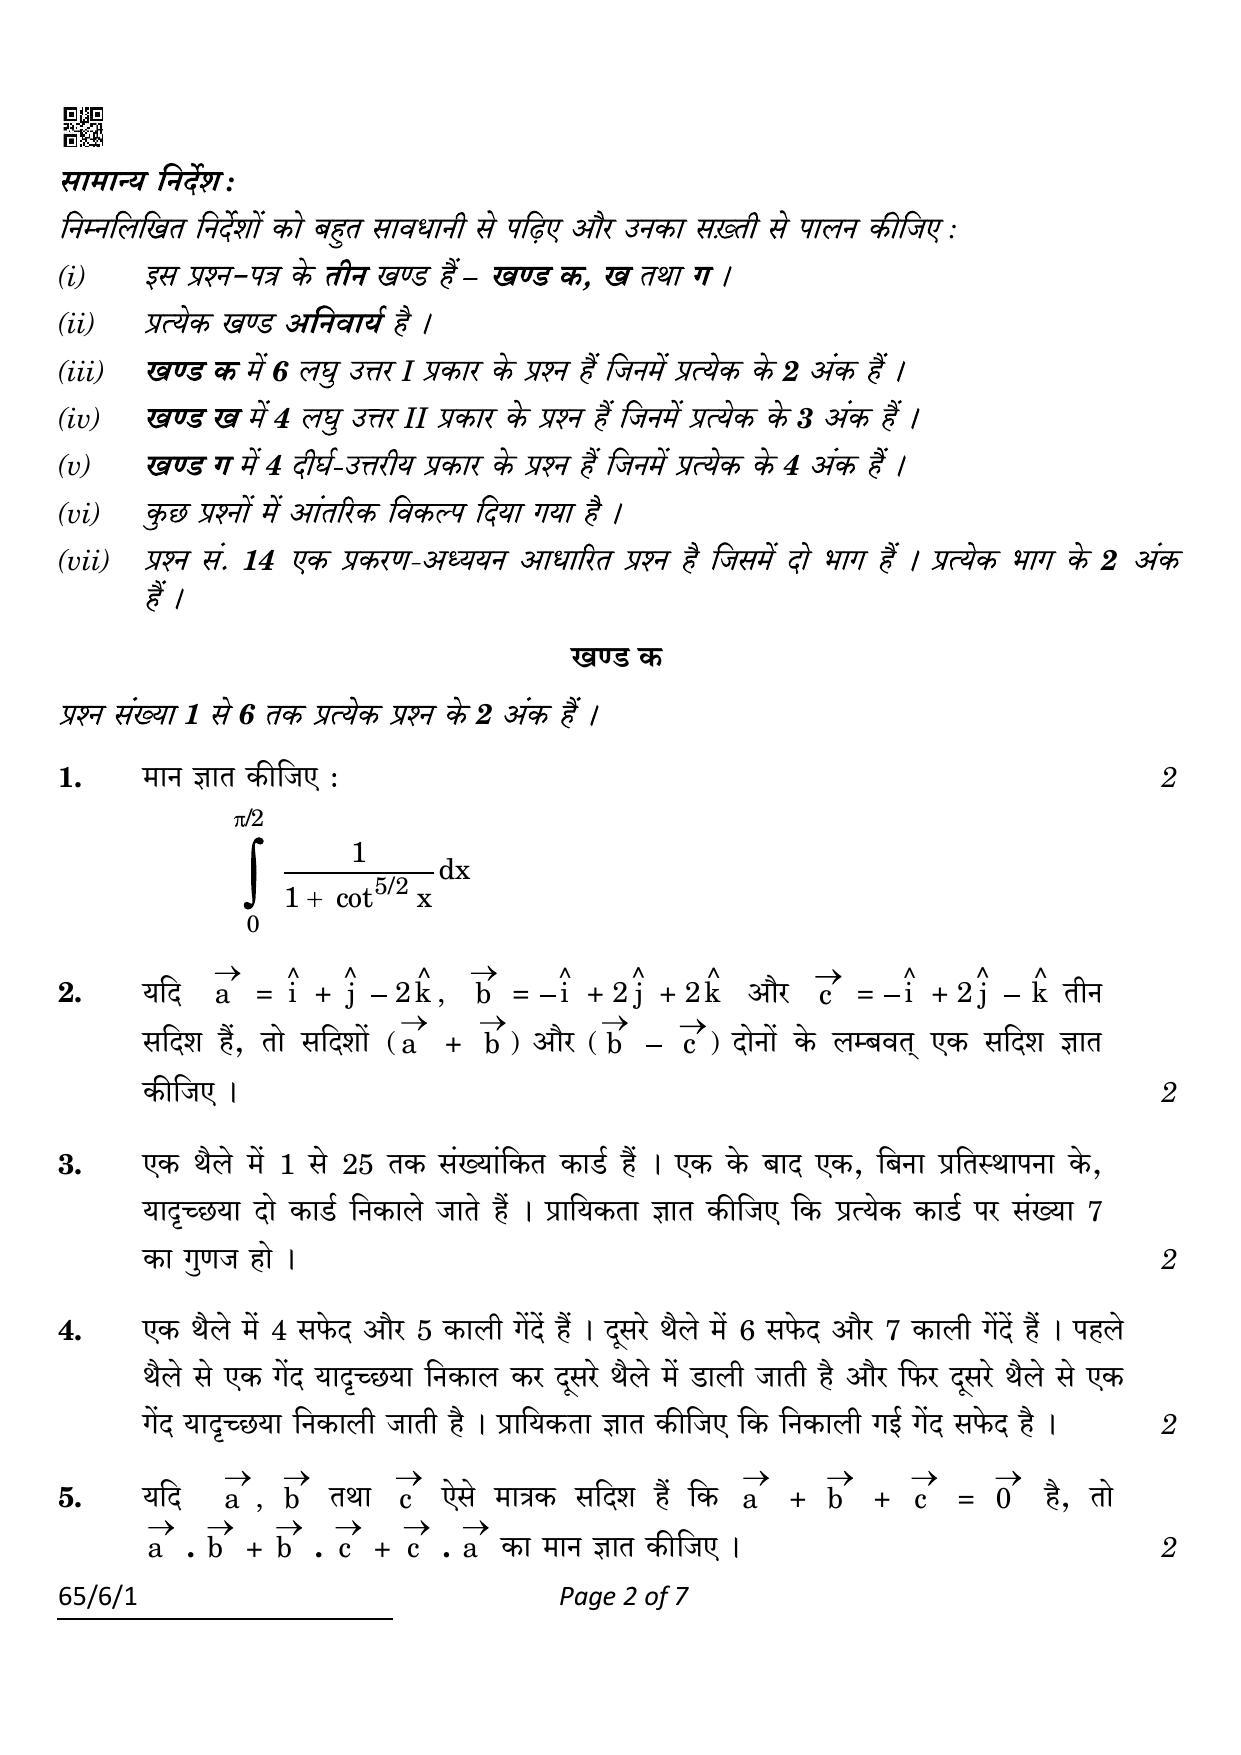 CBSE Class 12 65-6-1 MATHS 2022 Compartment Question Paper - Page 2